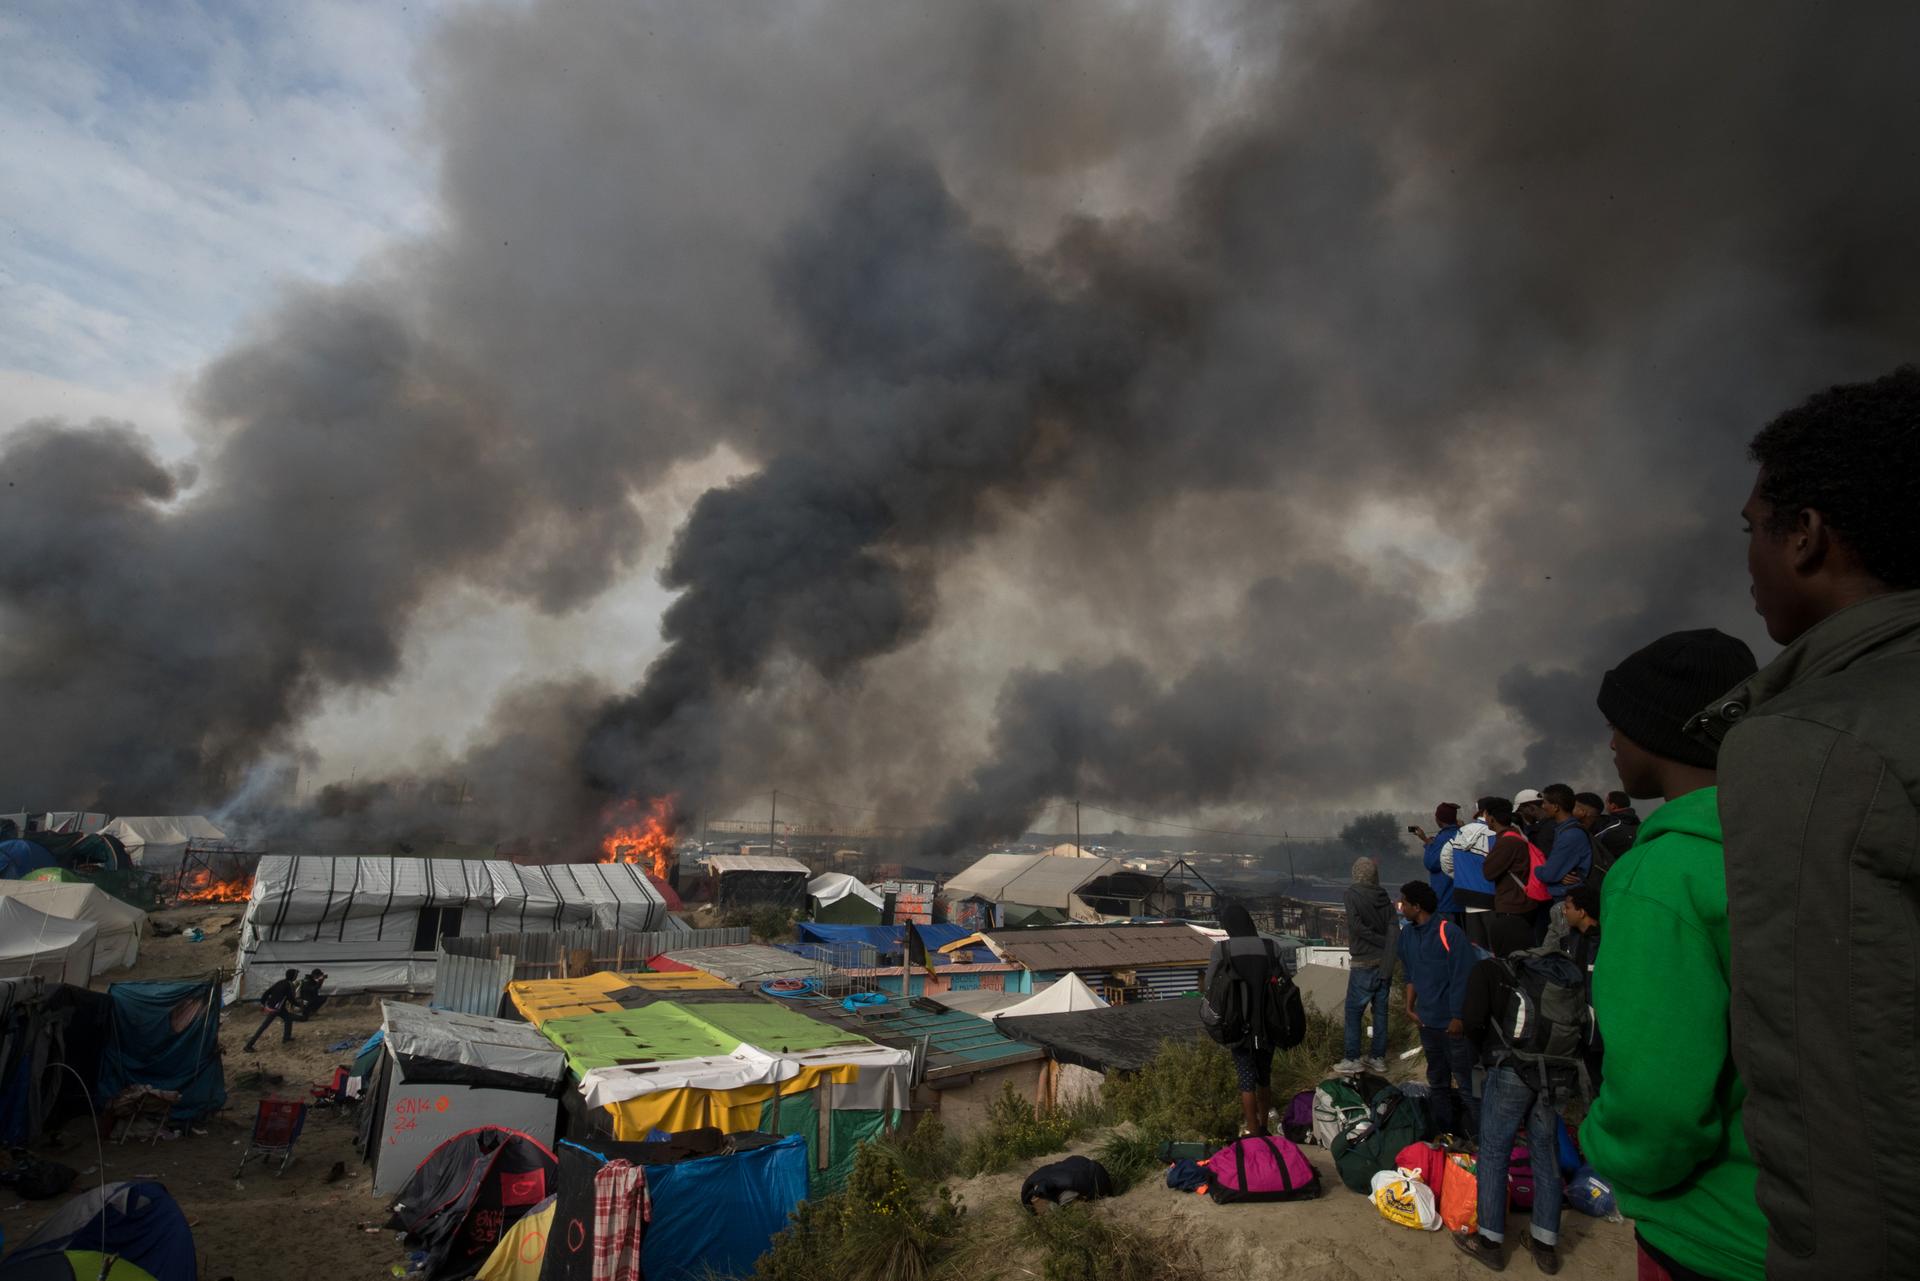 Fires broke out in many parts of the camp as the authorities attempted to clear it of residents.